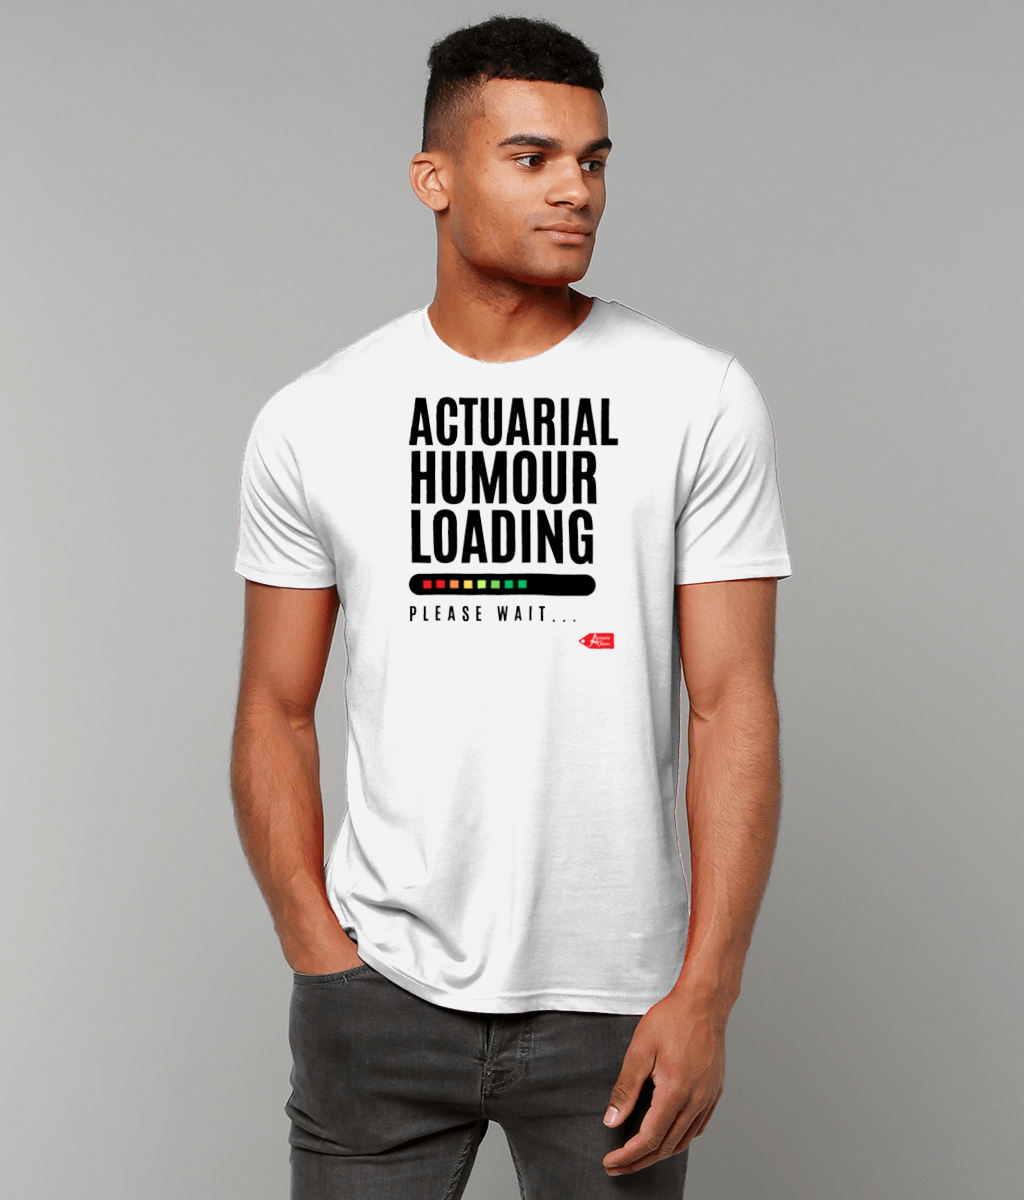 Actuarial Humour Loading T-shirt